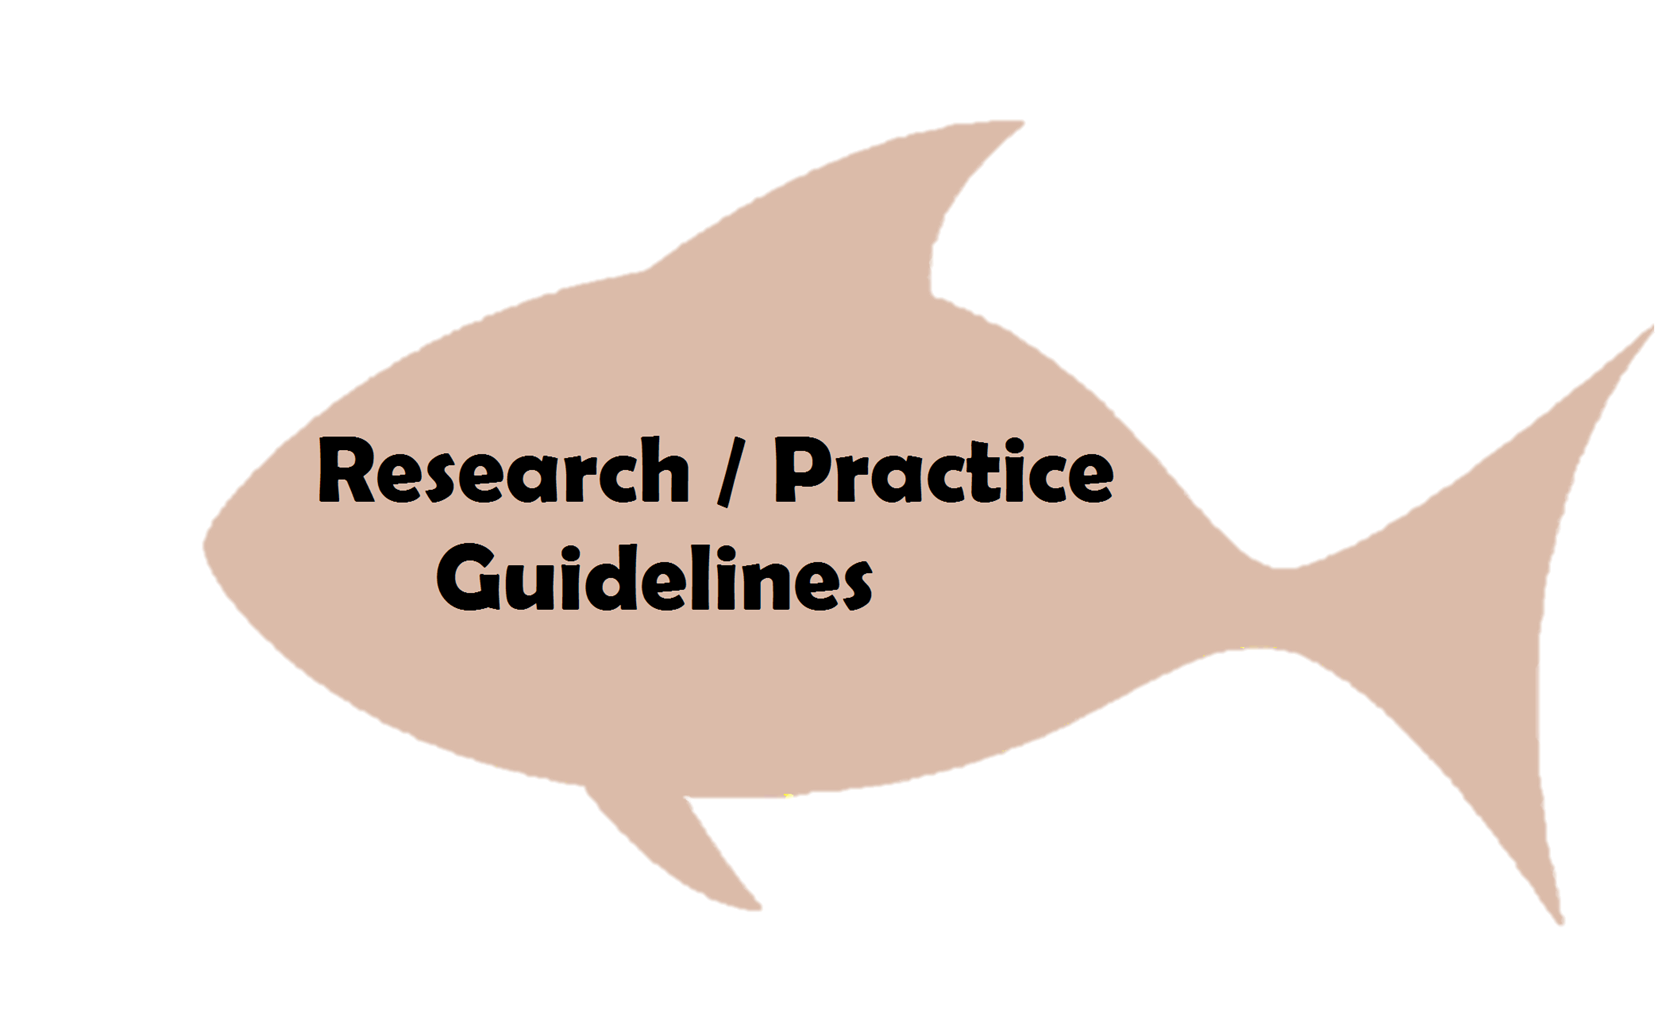 Research and Practice Guidelines